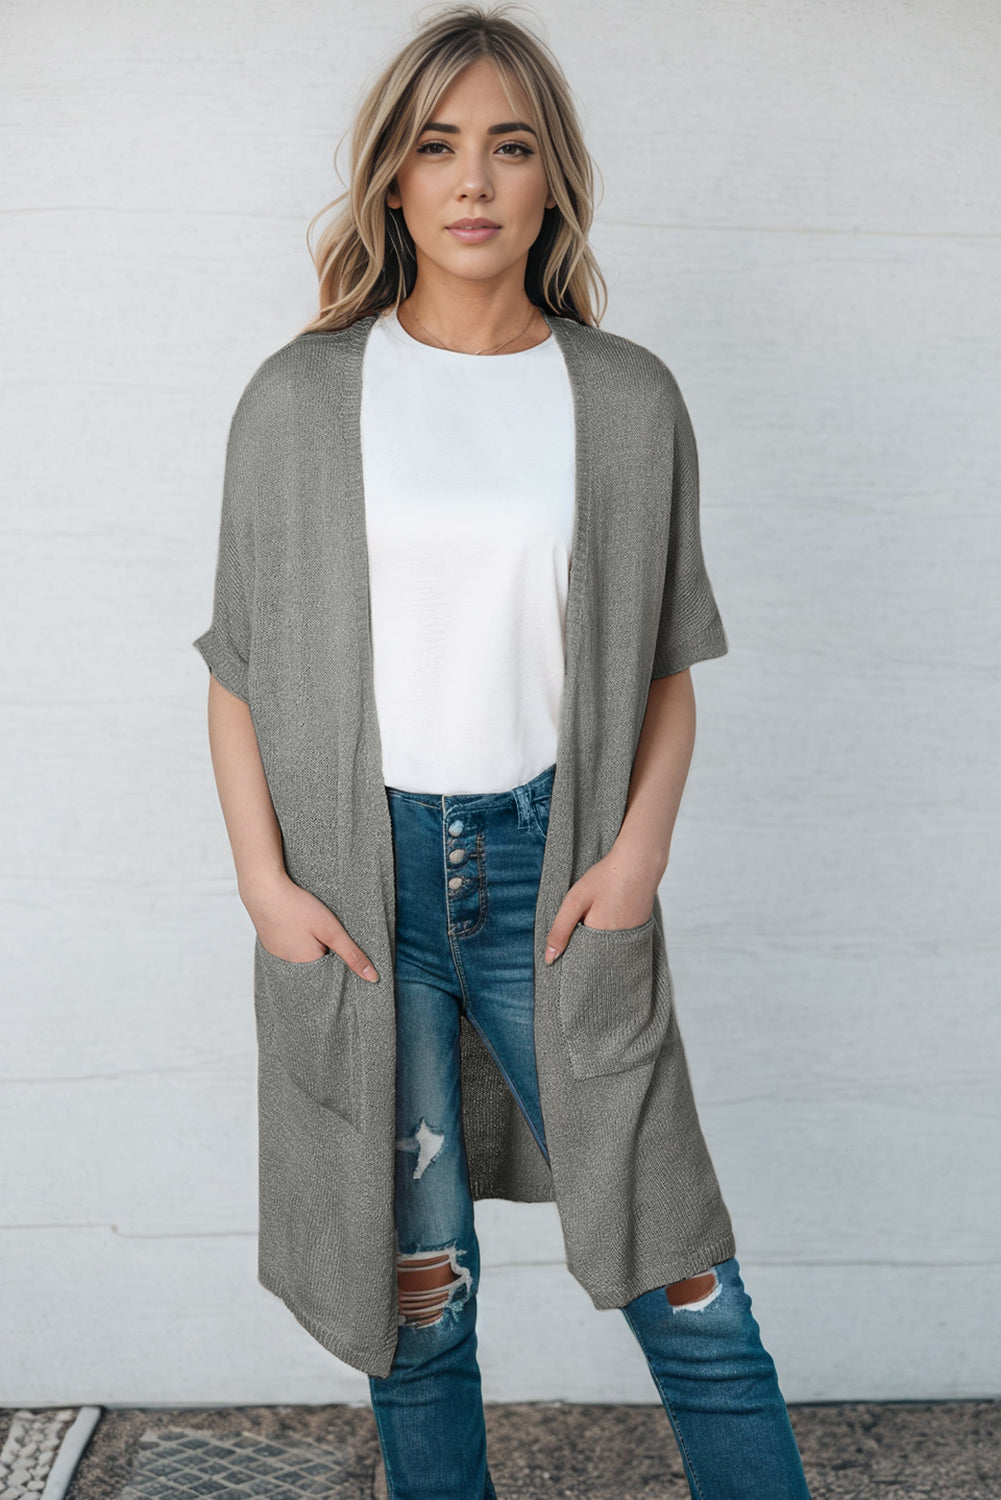 Light Gray Open Front Sweater Cardigan with Pockets